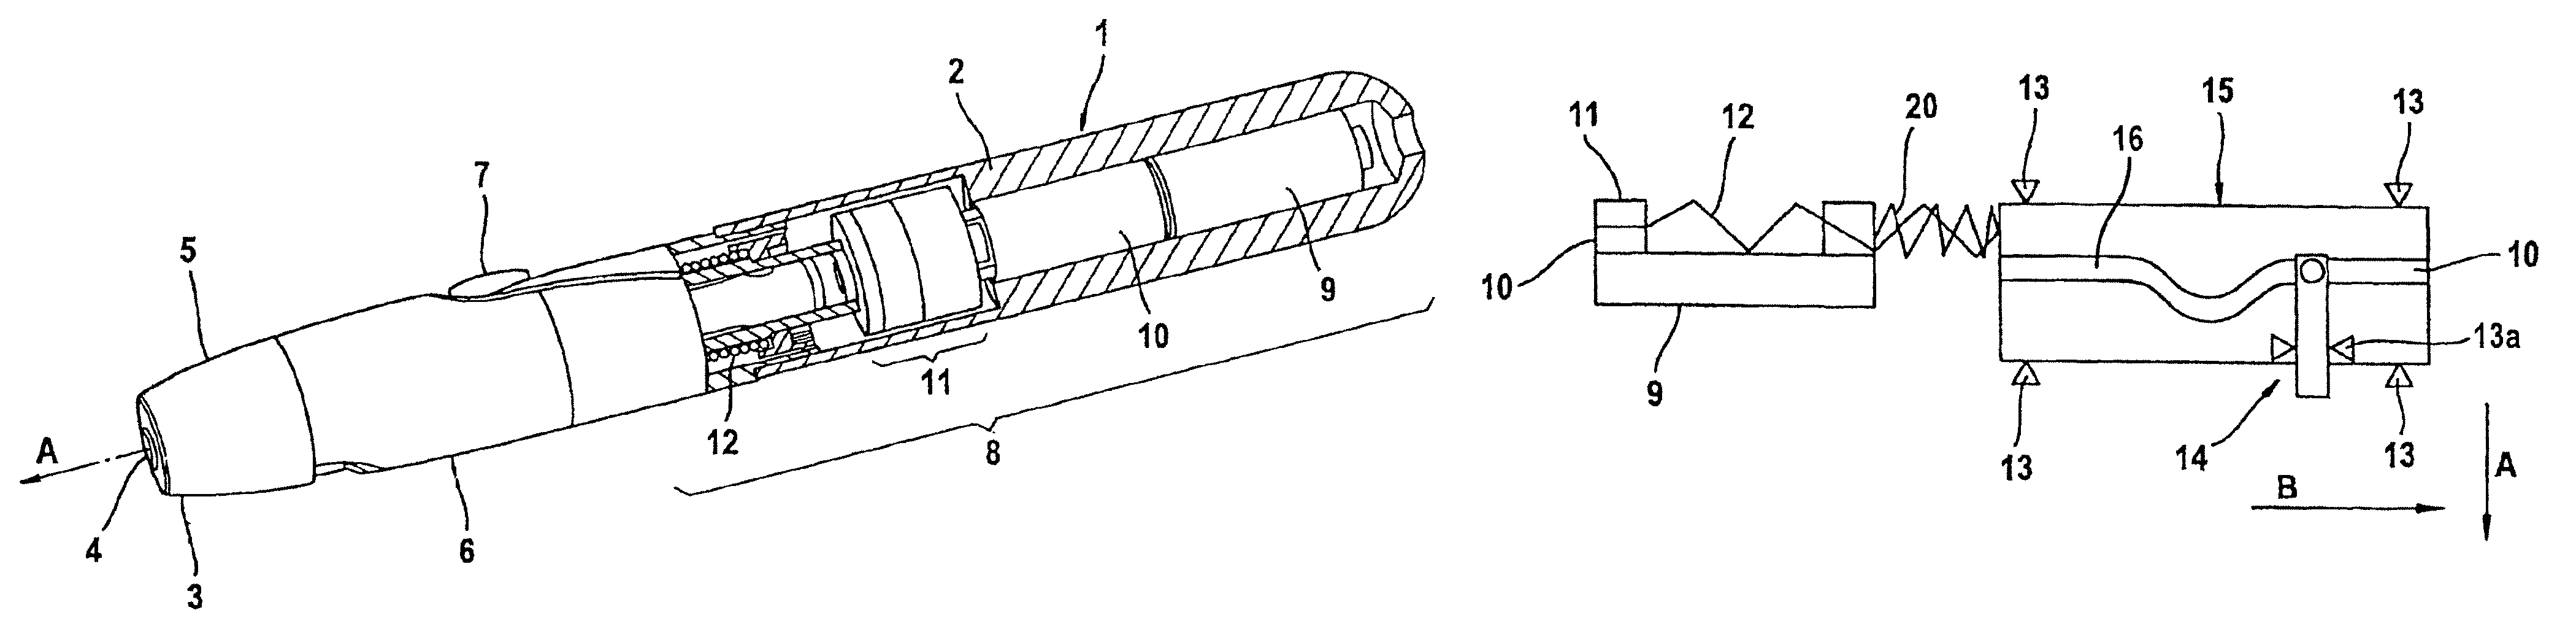 Integrated device for diagnostic purposes